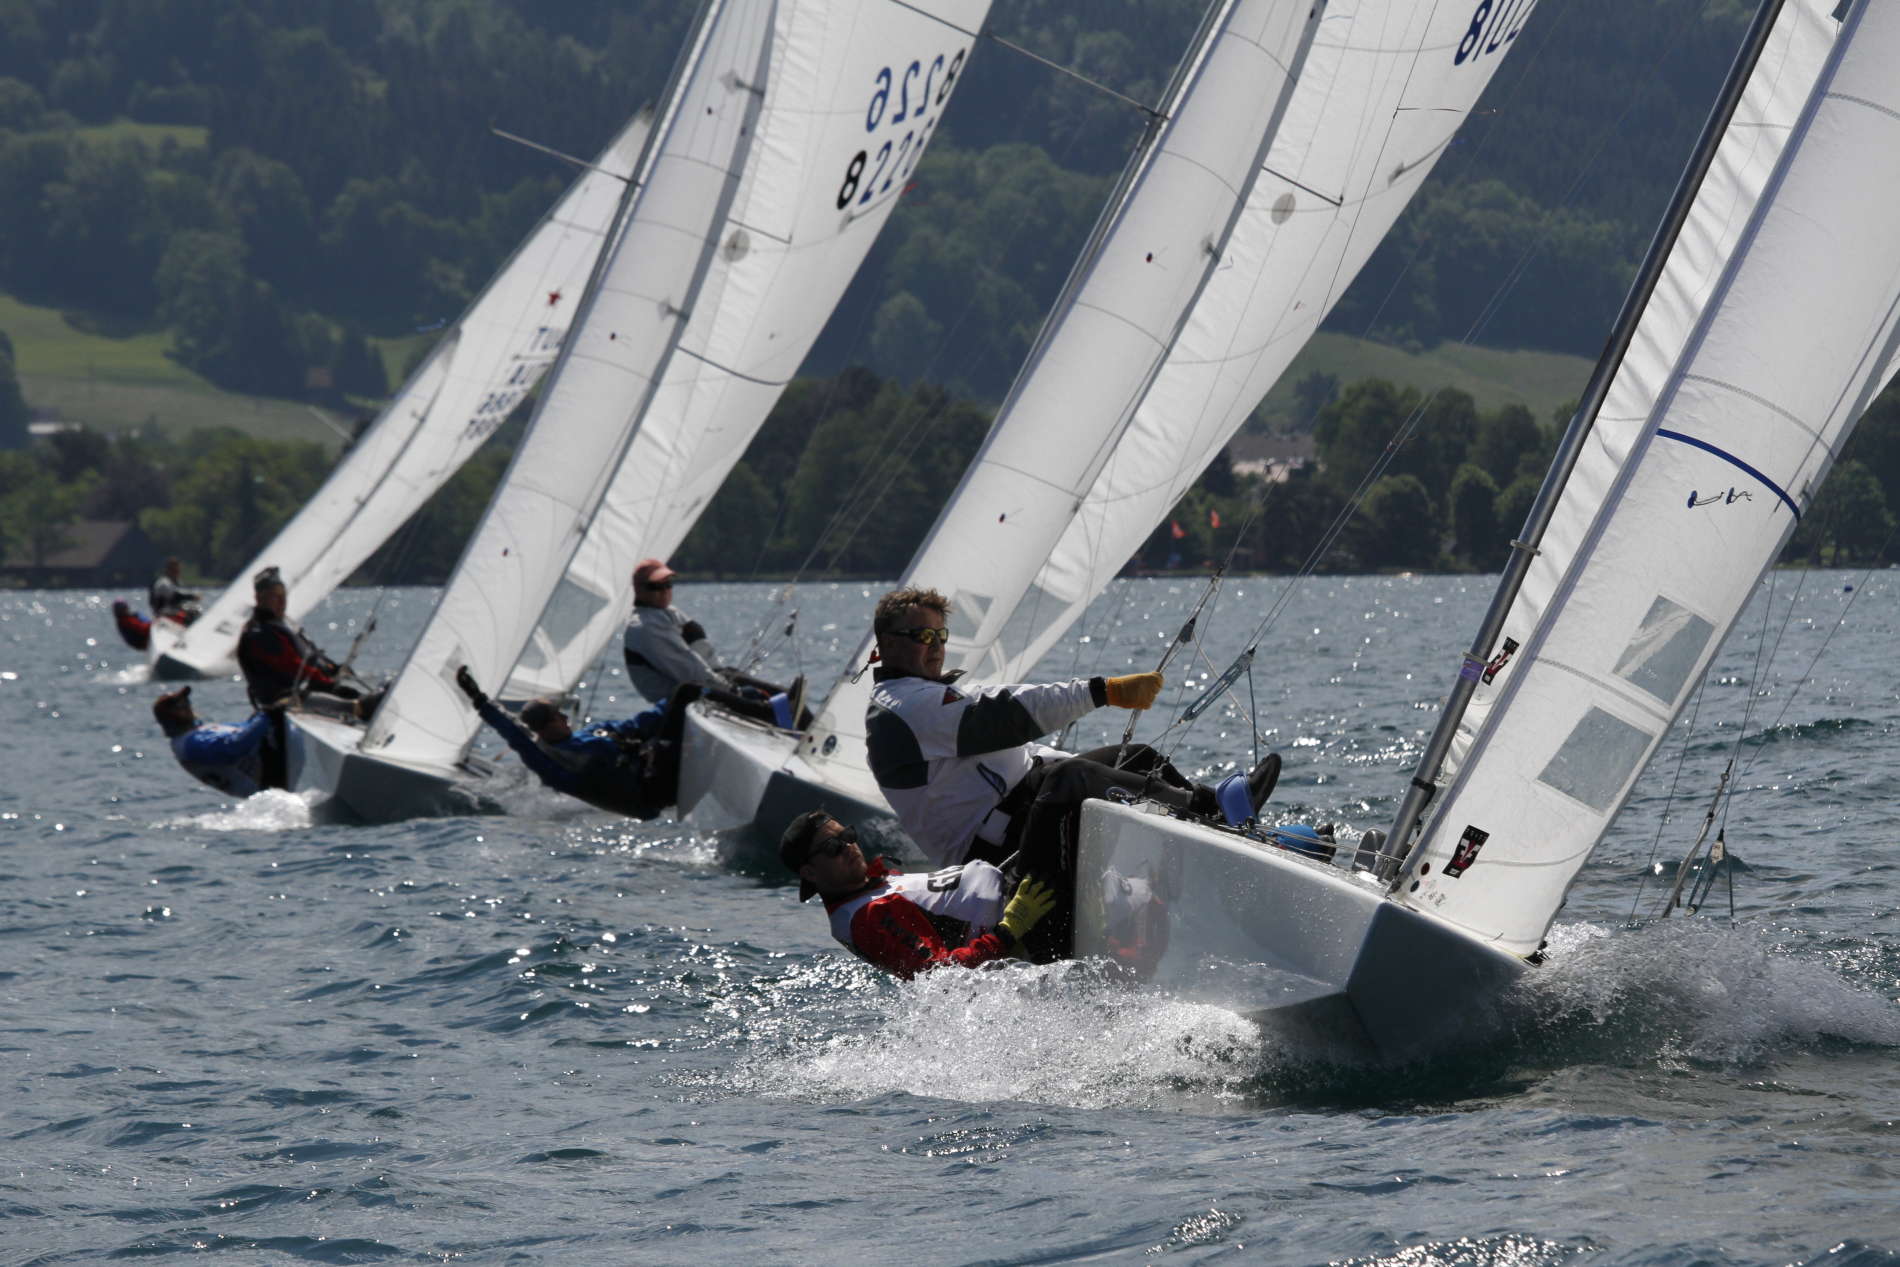  Star  Eastern Hemisphere Championship 2019  Attersee AUT  Final results